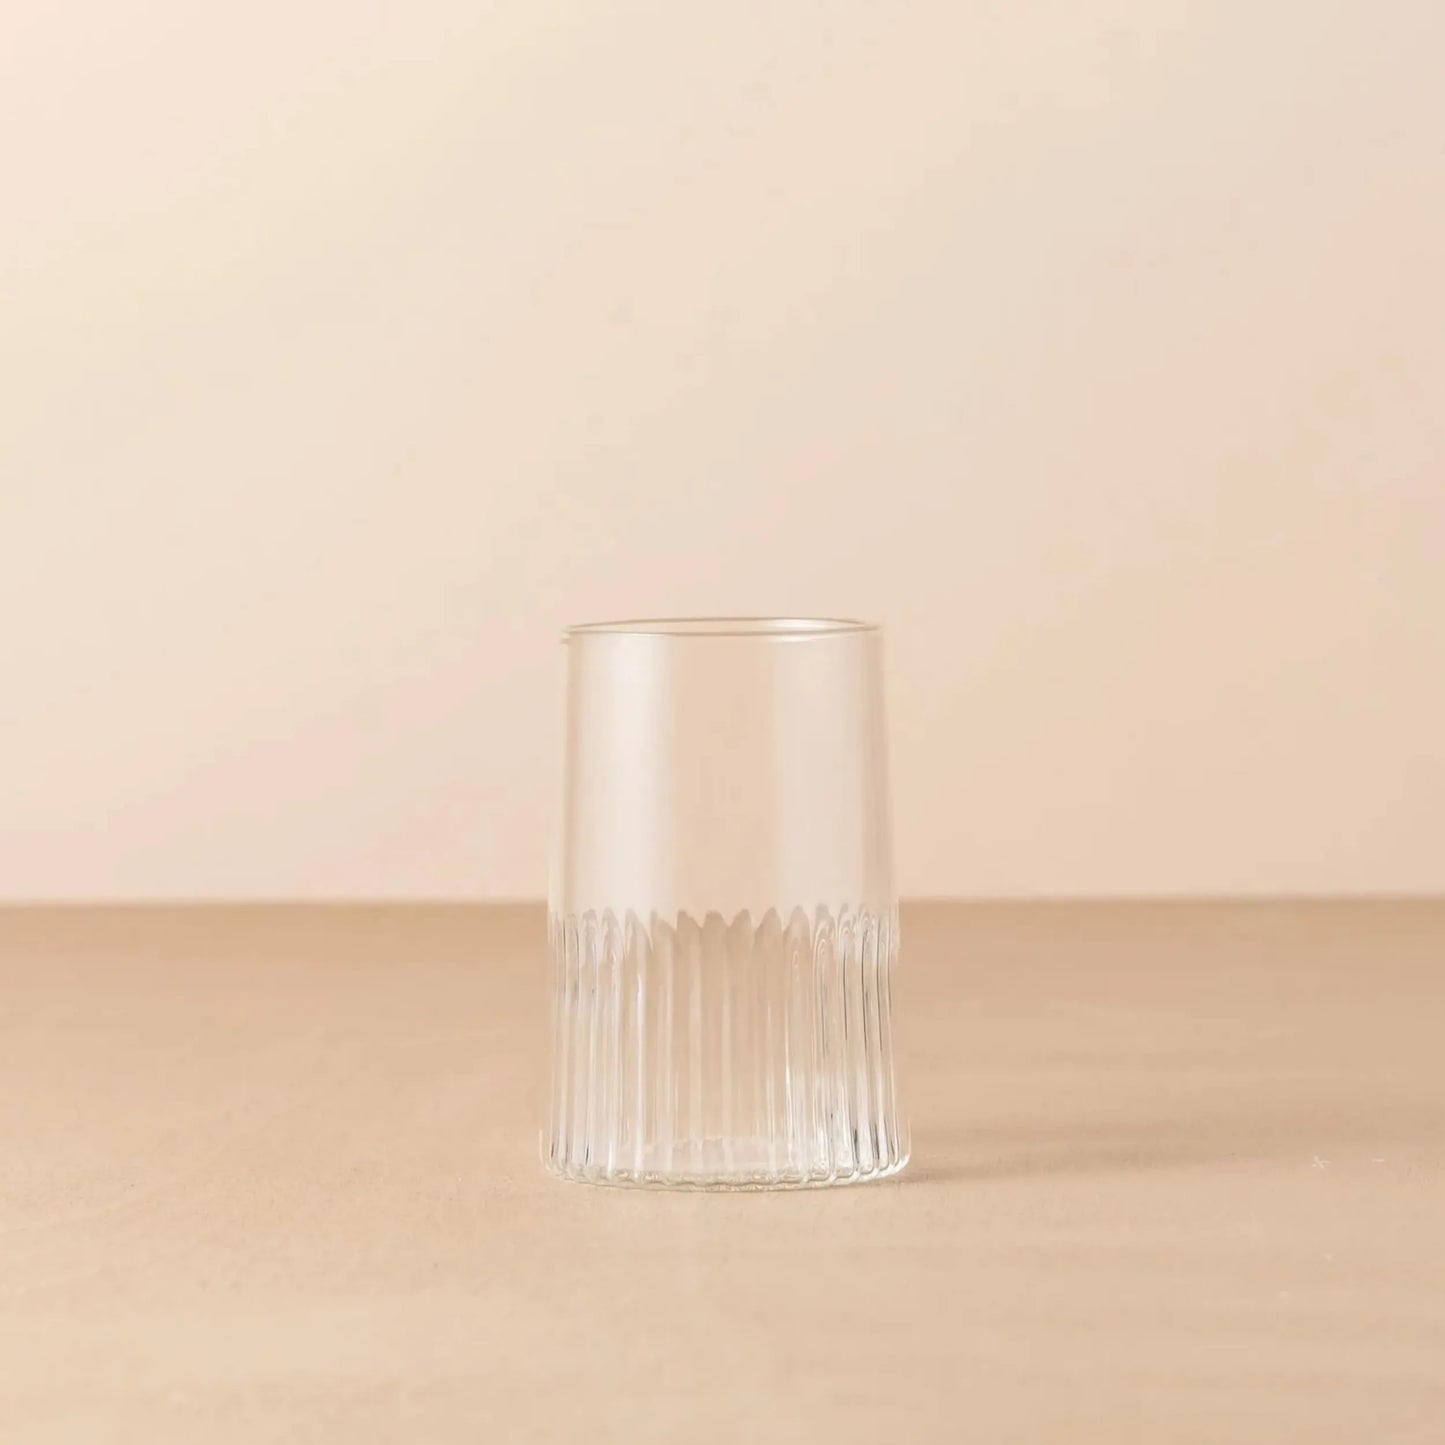 Kairos Water Glass Set of 2 - Clear